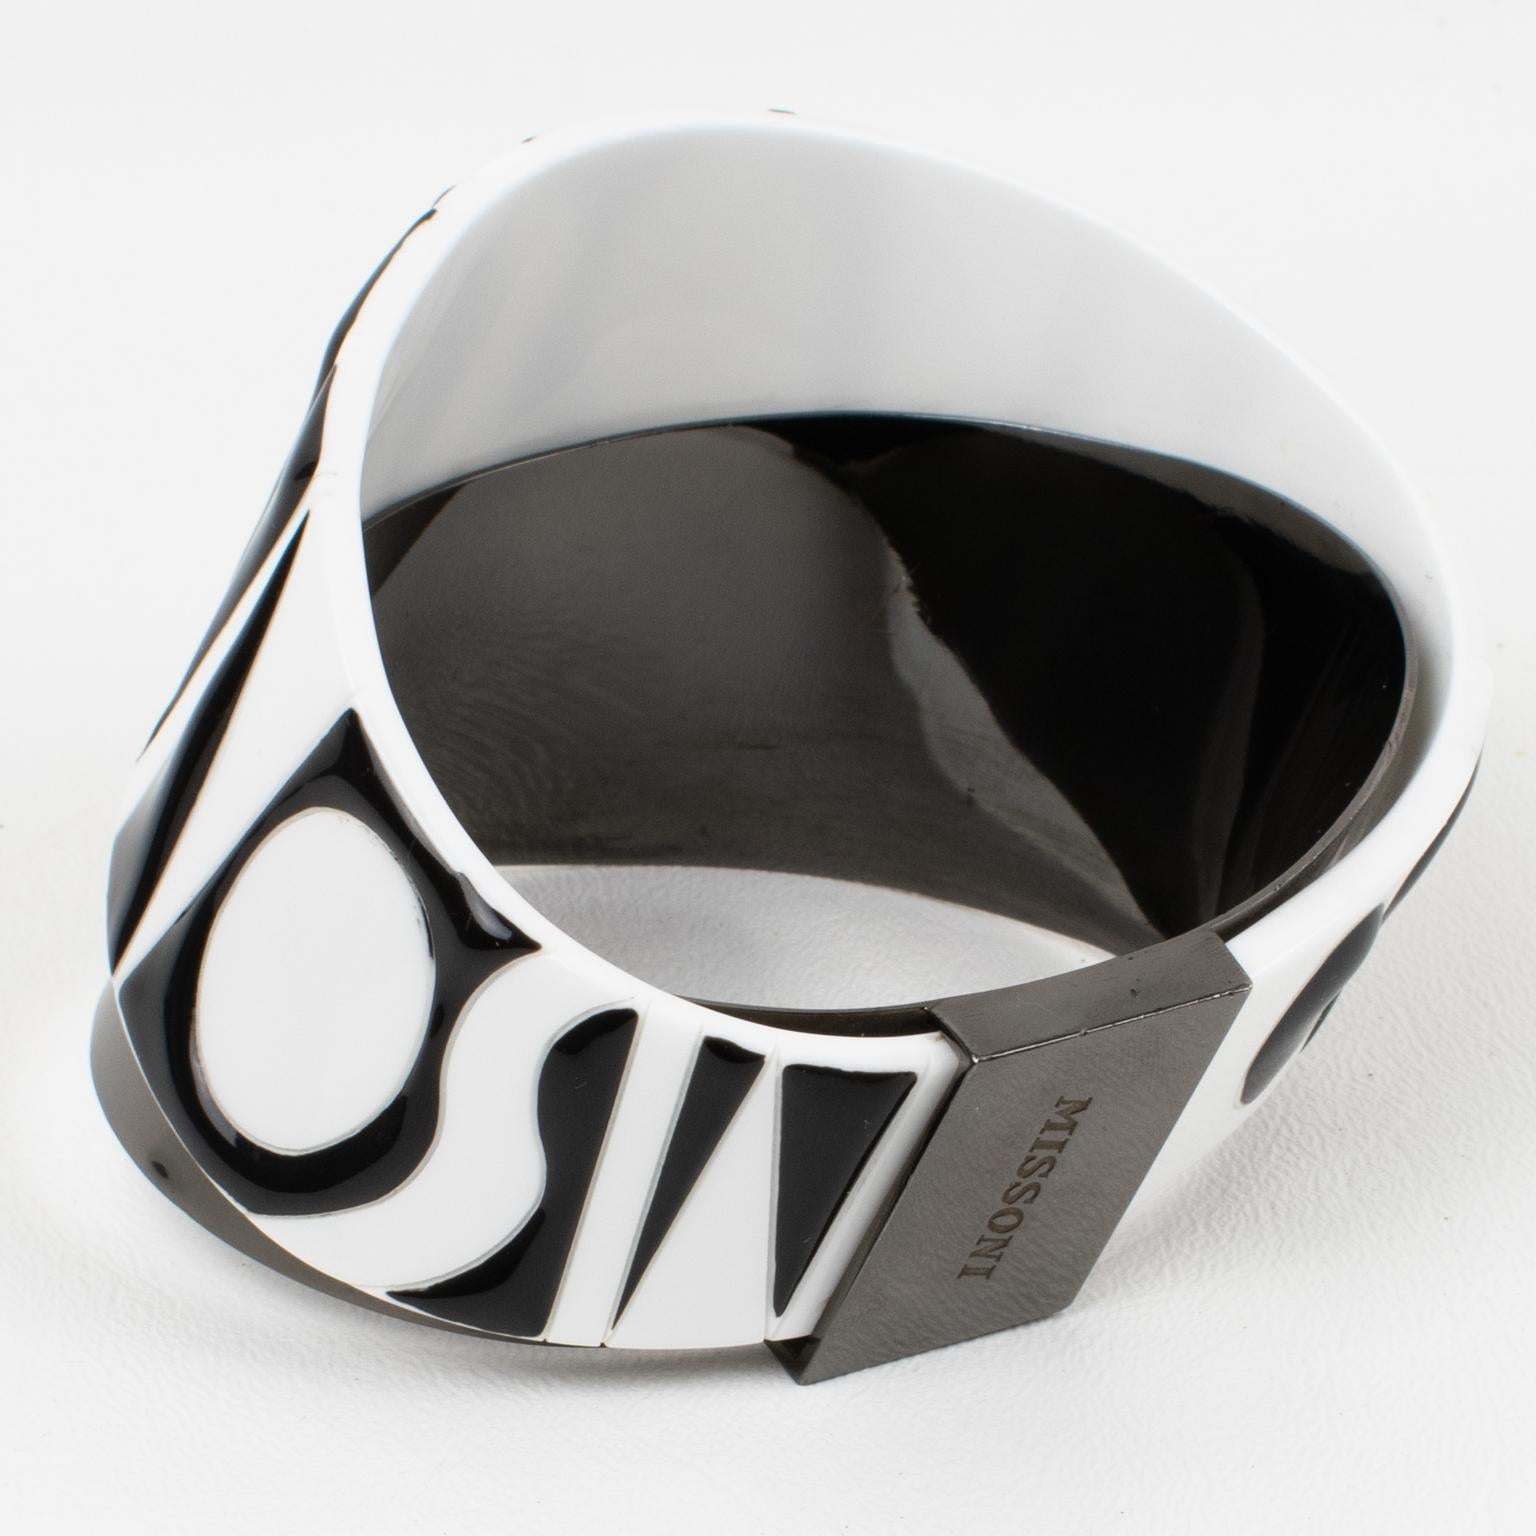 Missoni Black and White Lucite and Metal Bracelet Bangle, Runway Spring 2014 In Good Condition For Sale In Atlanta, GA